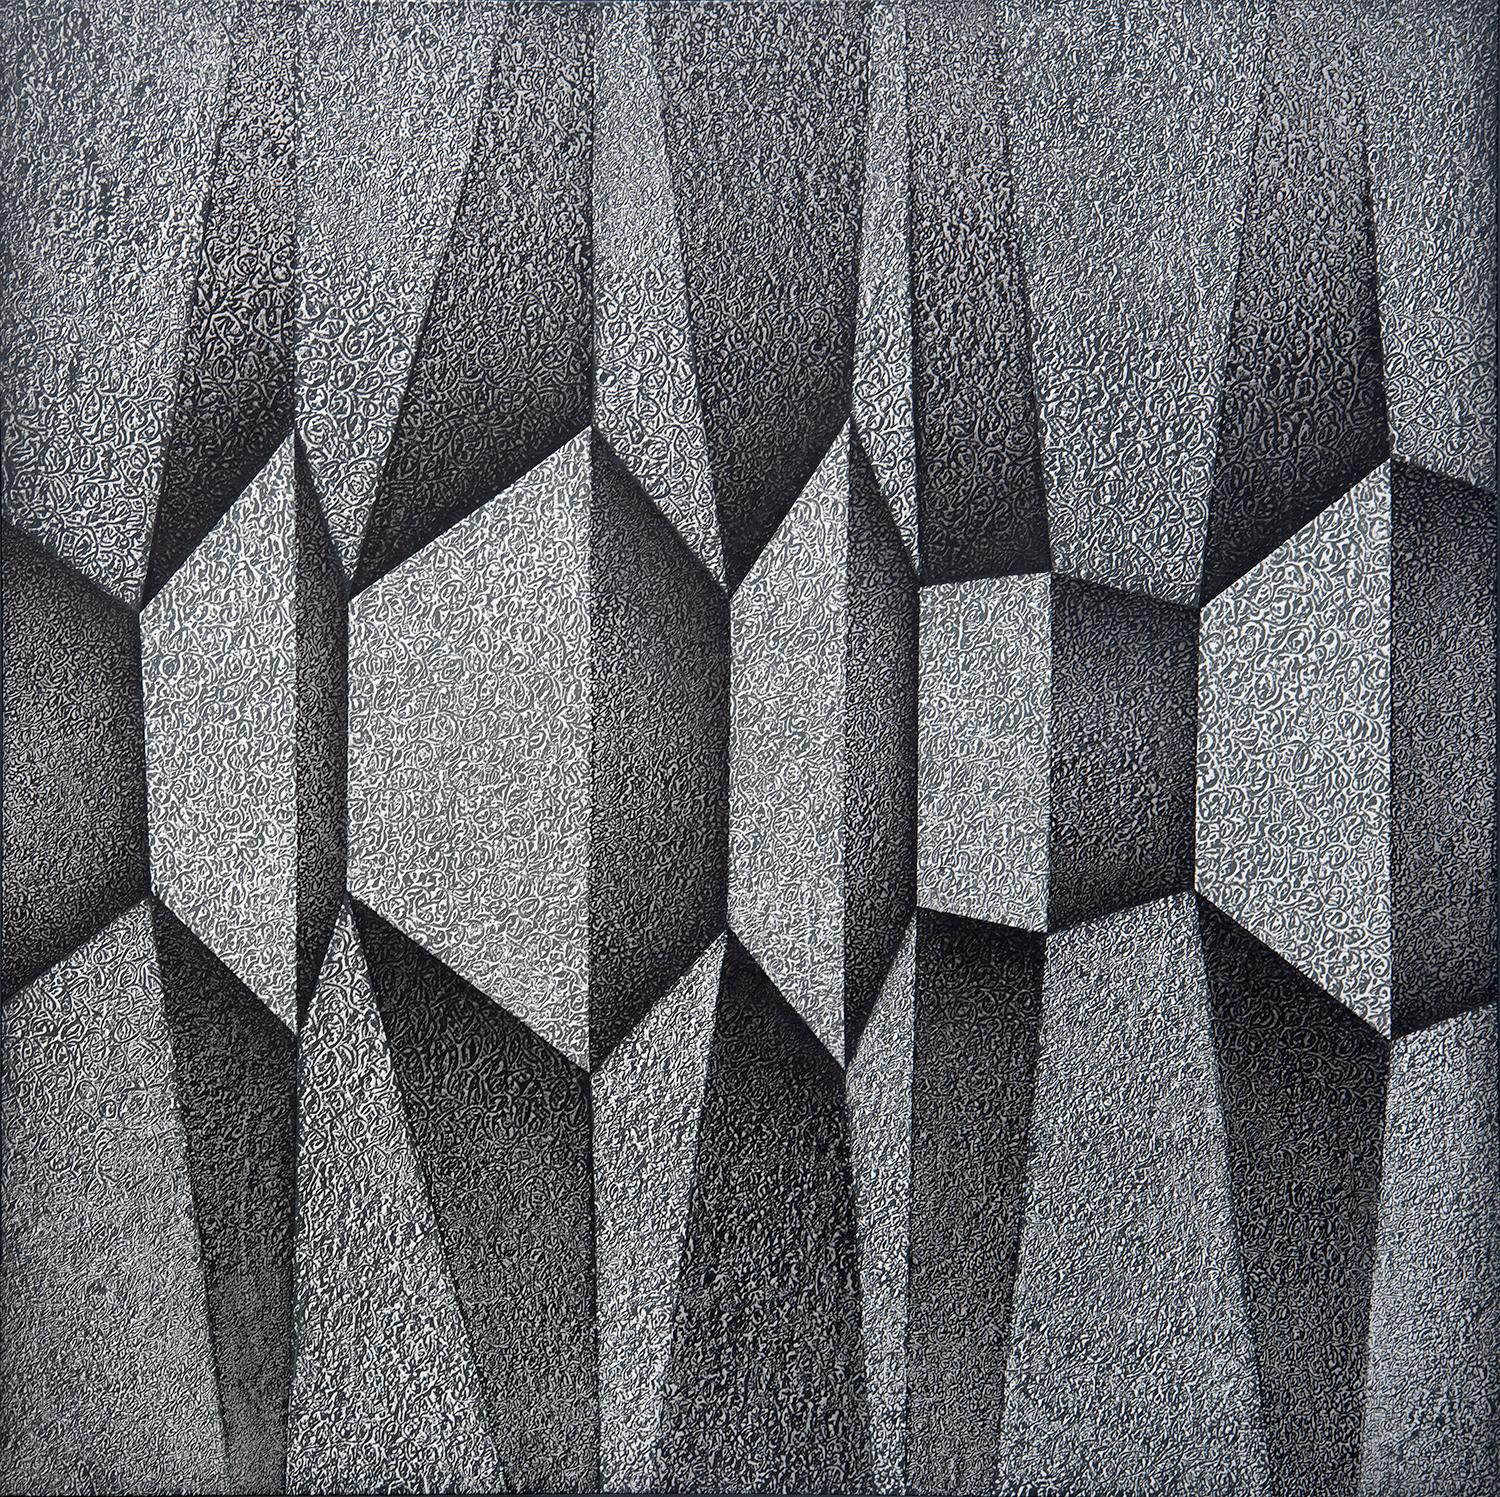 Bill Maggio Abstract Painting - Large Black and White Geometric Abstract Contemporary Painting Museum Detailed